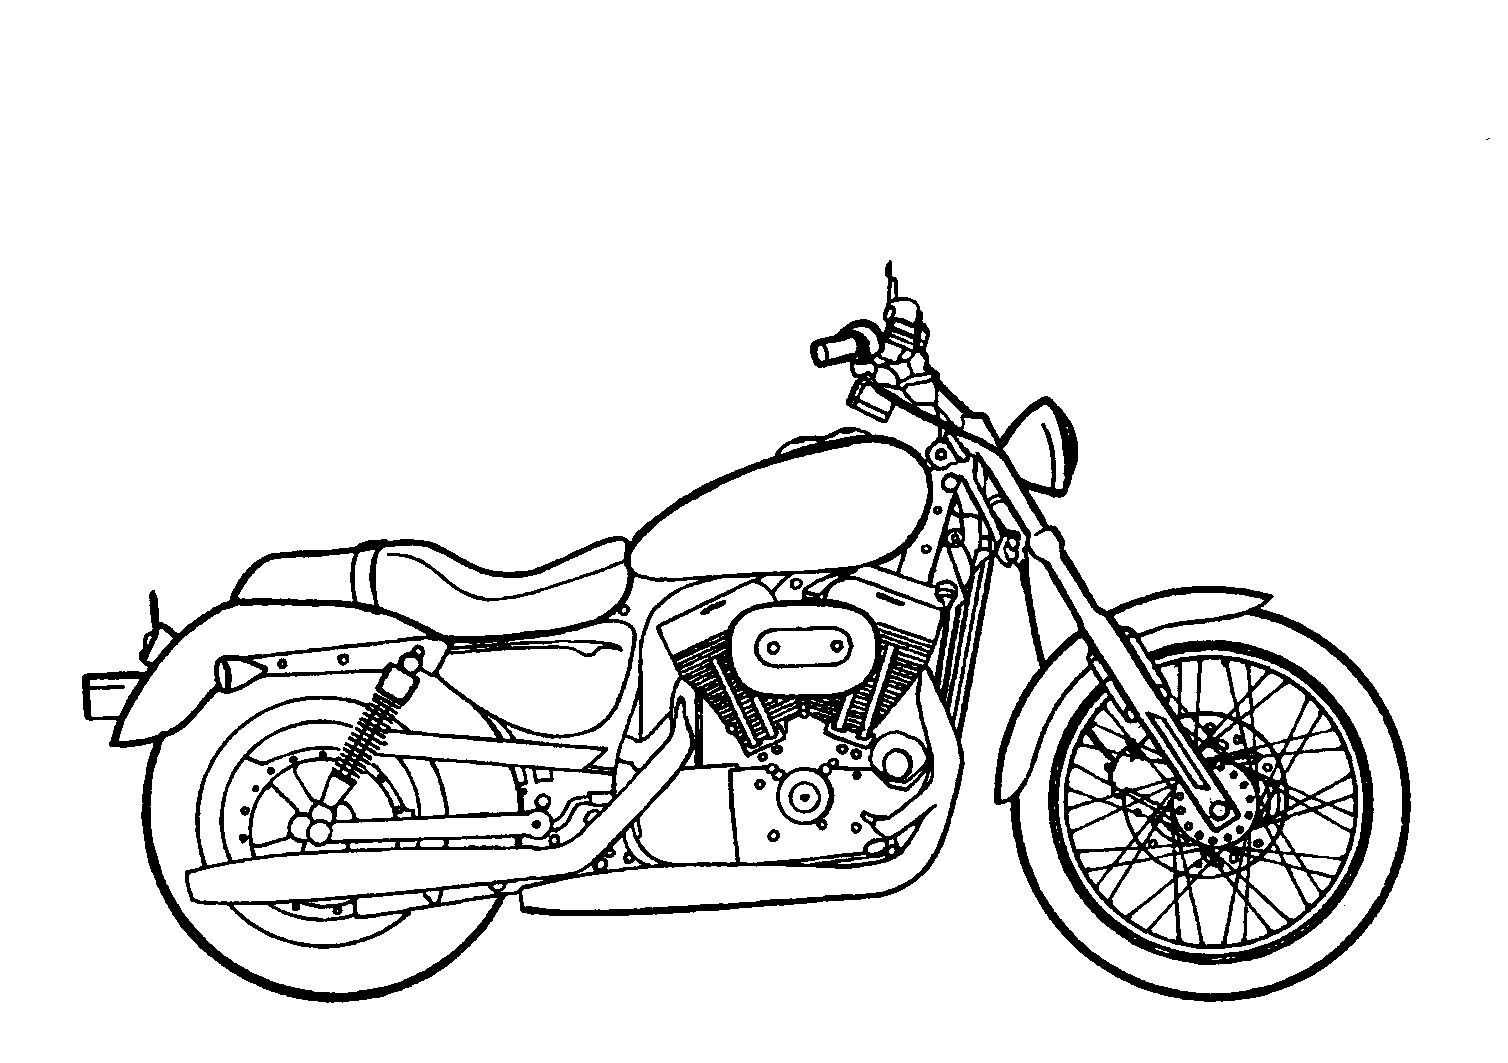 And Black White Motorcycle Clipart 